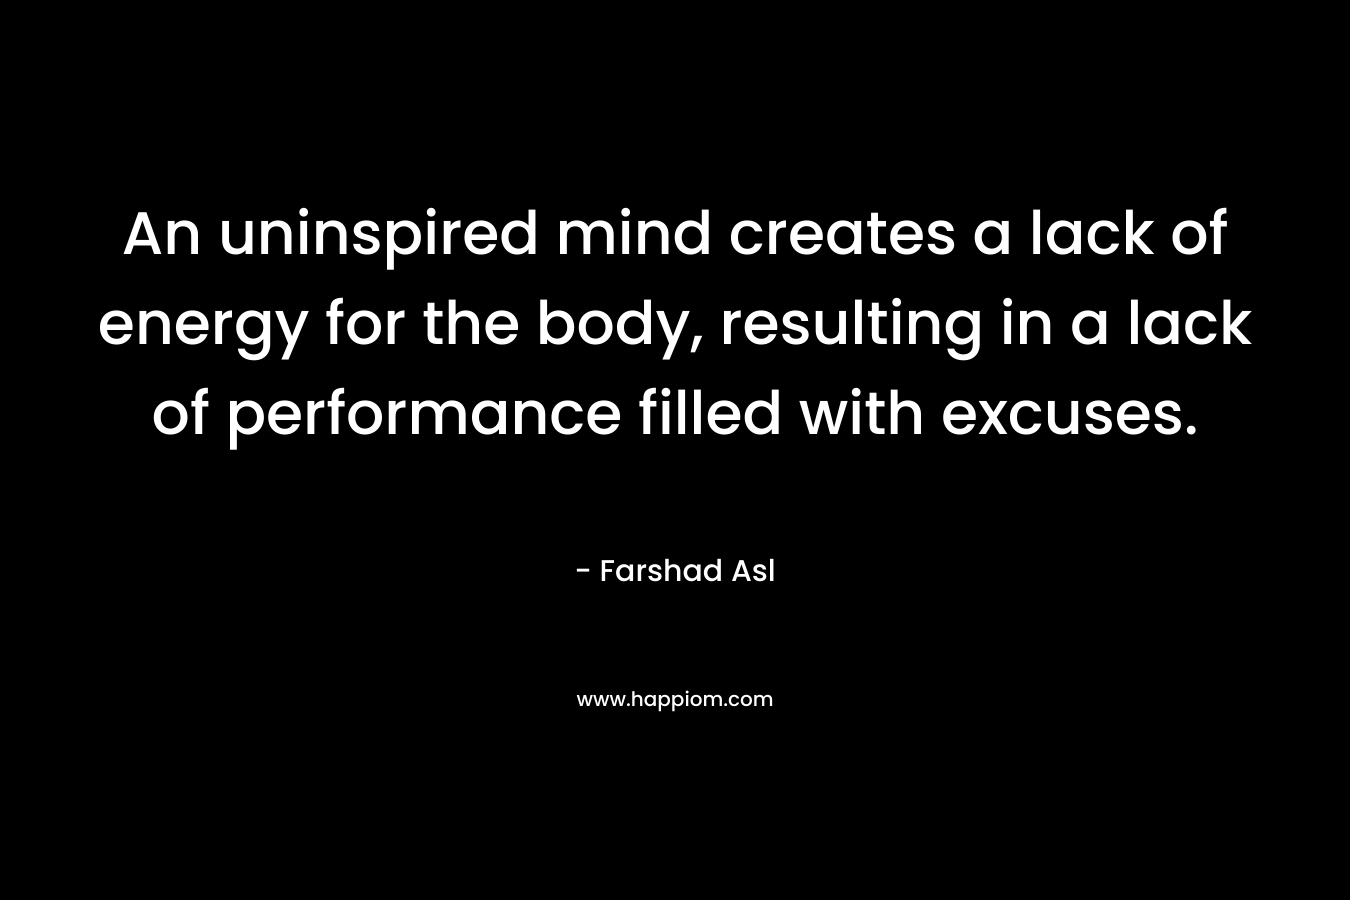 An uninspired mind creates a lack of energy for the body, resulting in a lack of performance filled with excuses. – Farshad Asl